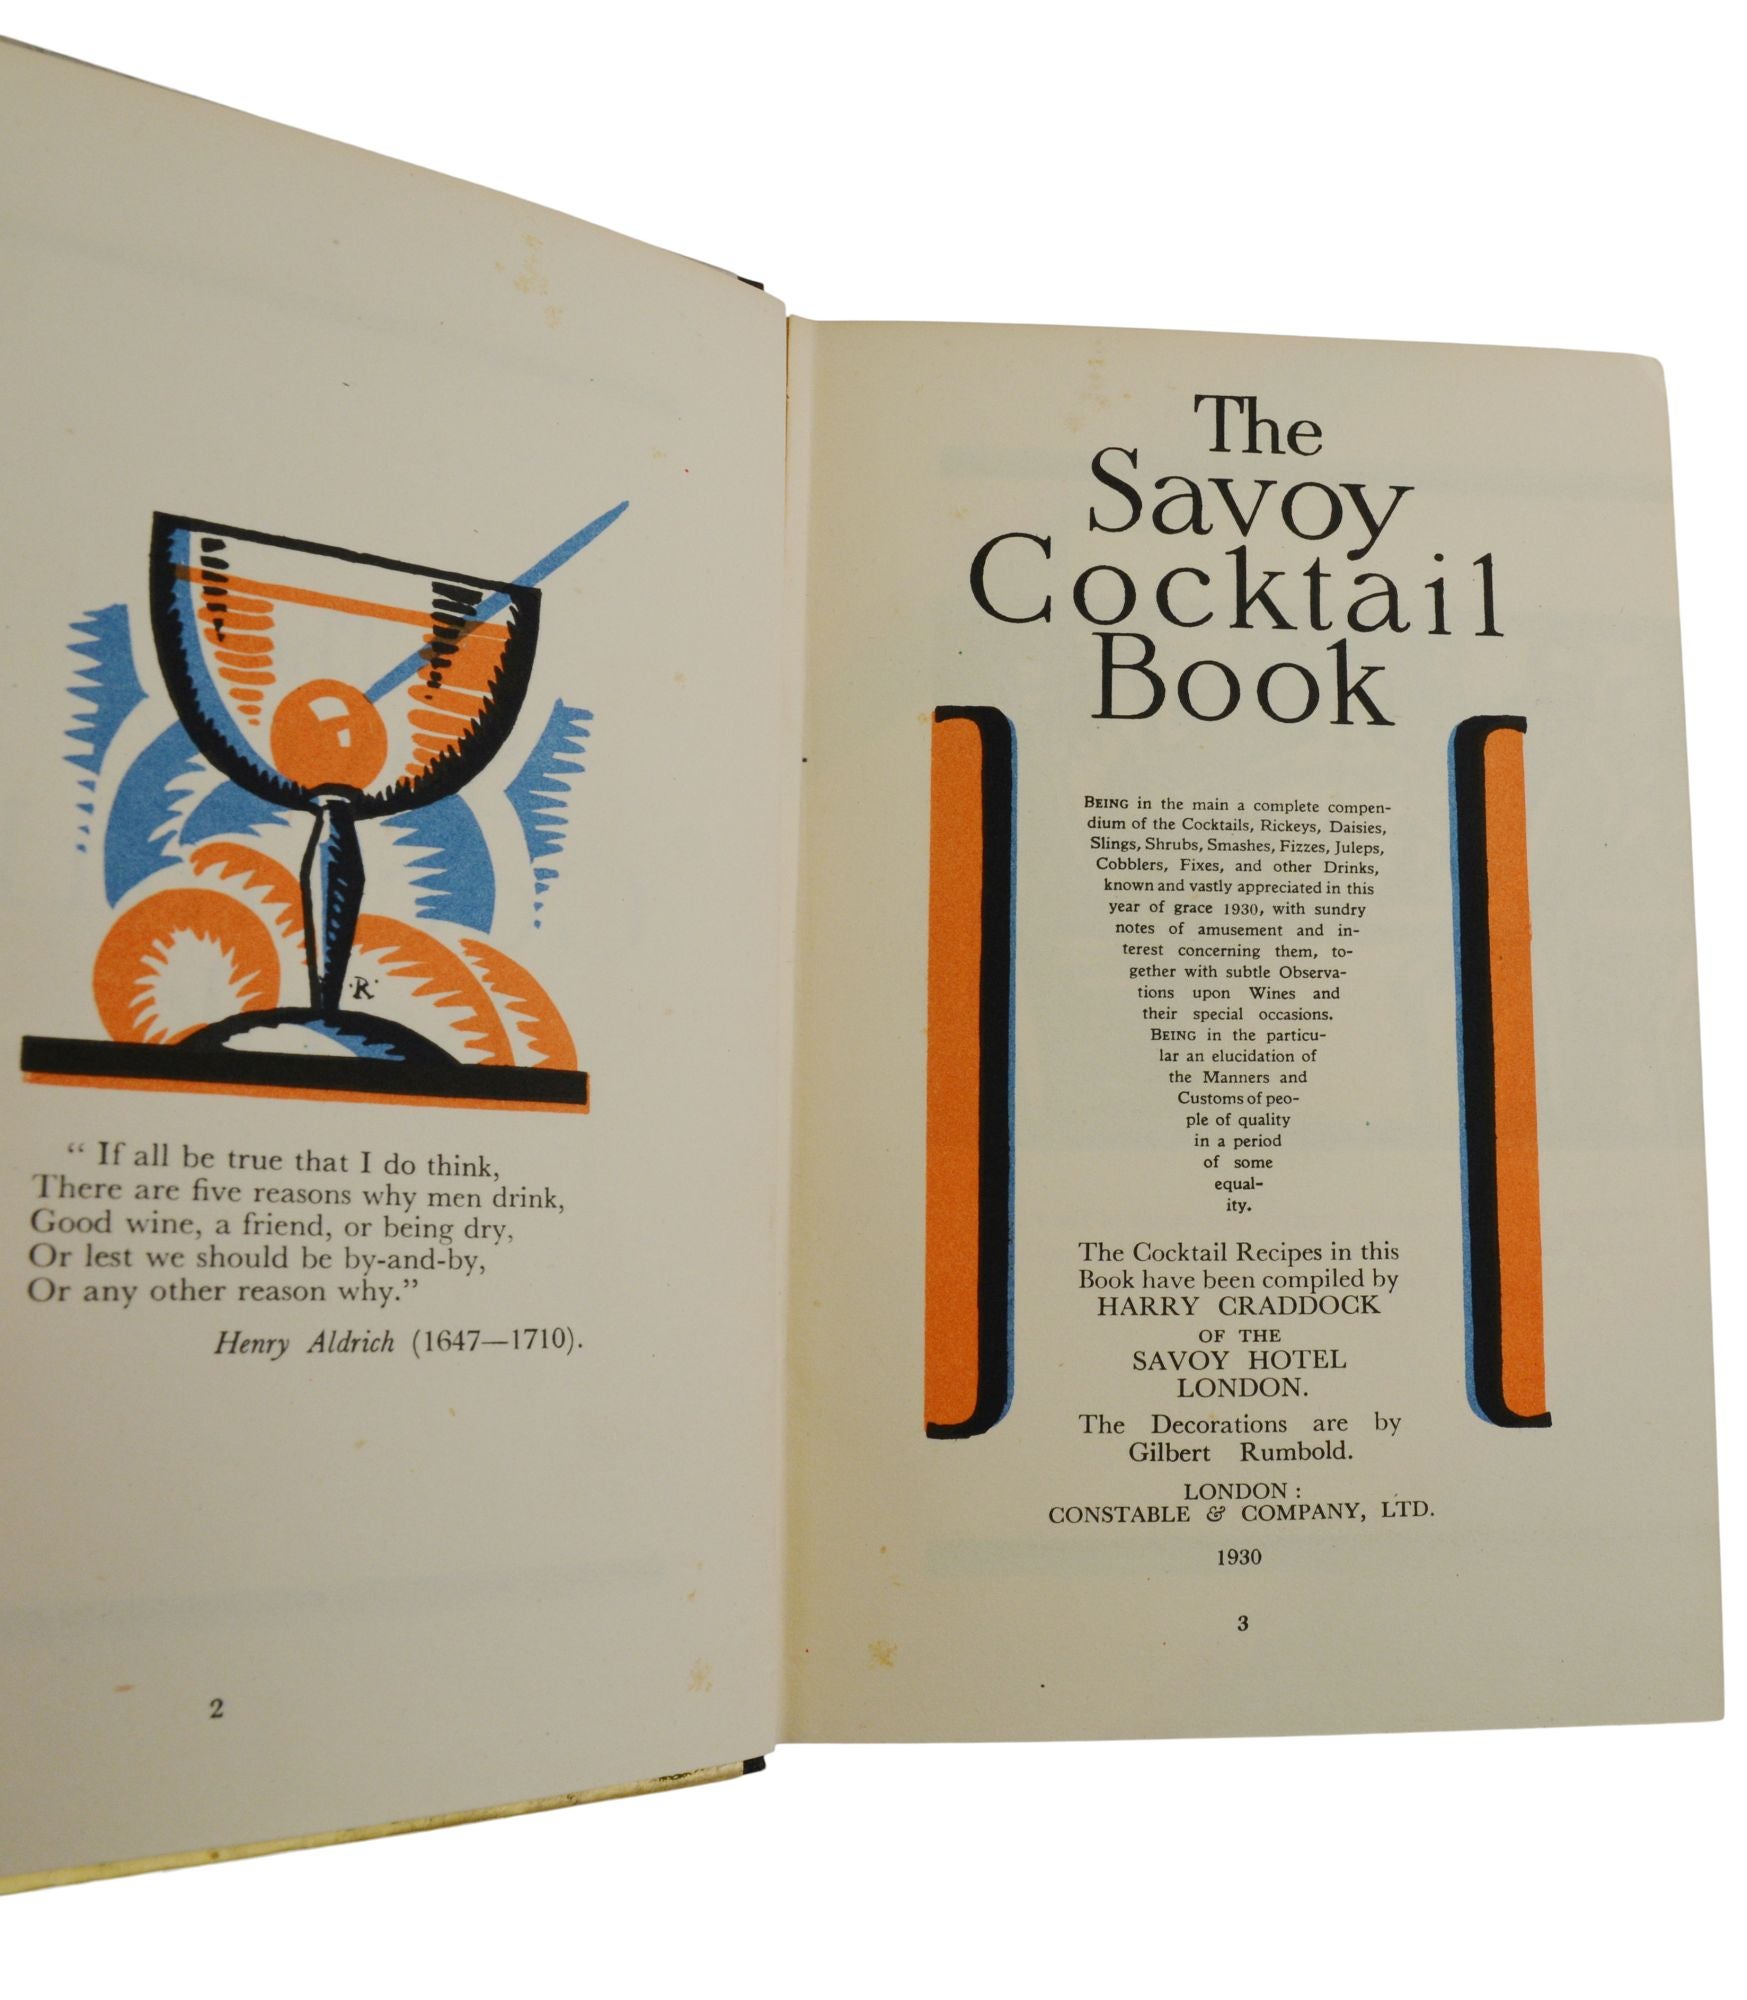 The Savoy Cocktail Book by Harry Craddock on Burnside Rare Books